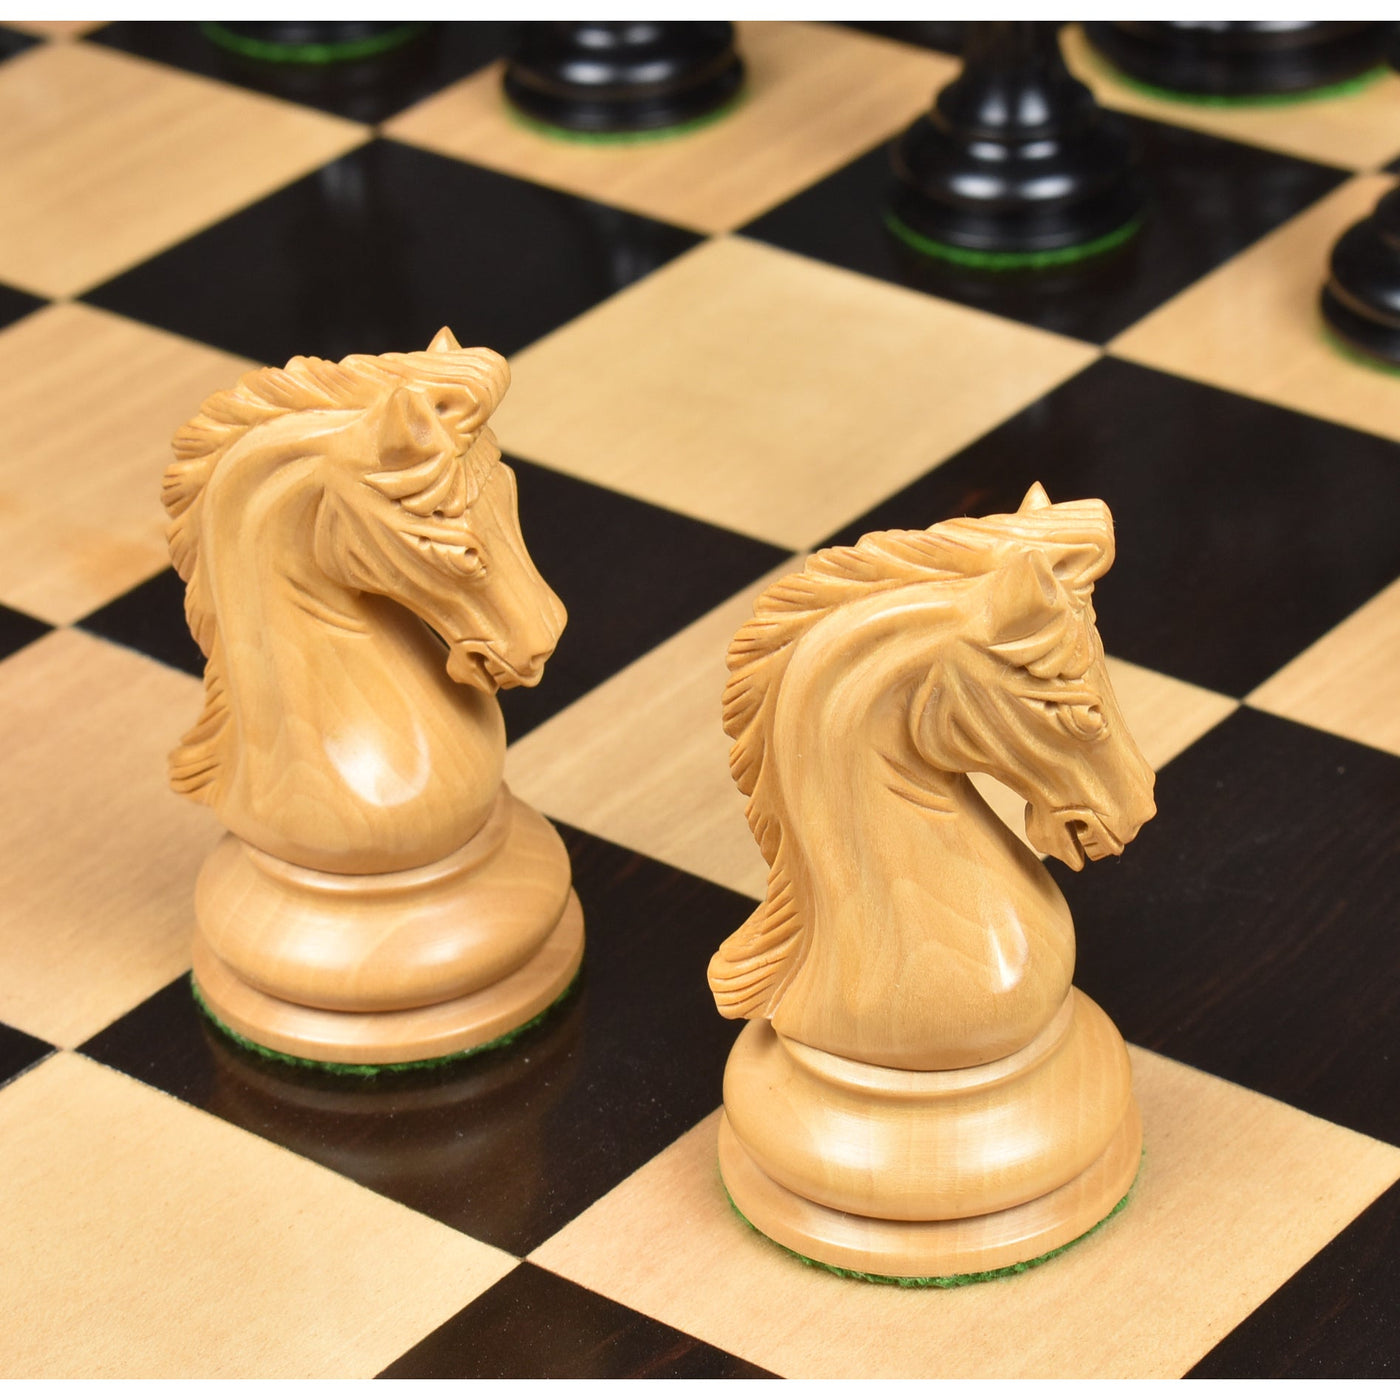 Combo of Repro 2016 Sinquefield Staunton Chess Set - Pieces in Bud Rosewood Pieces with Board and Box